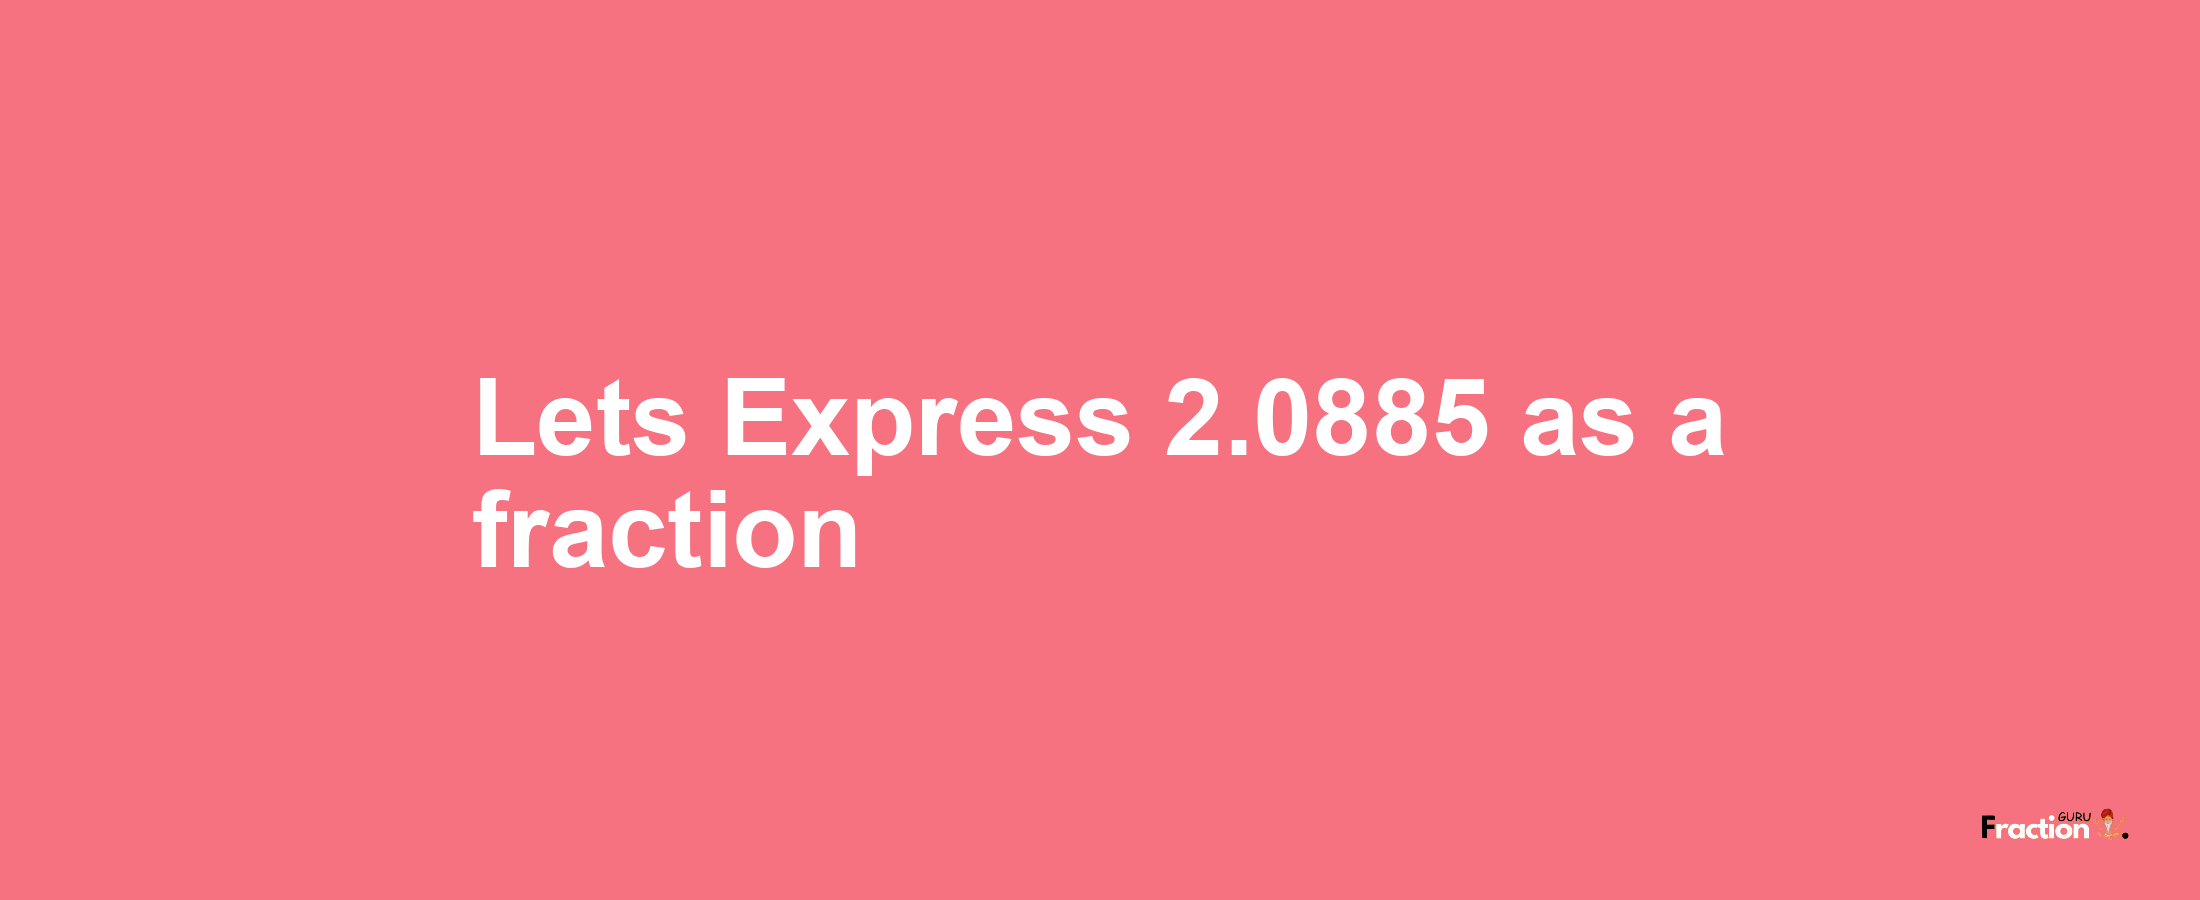 Lets Express 2.0885 as afraction